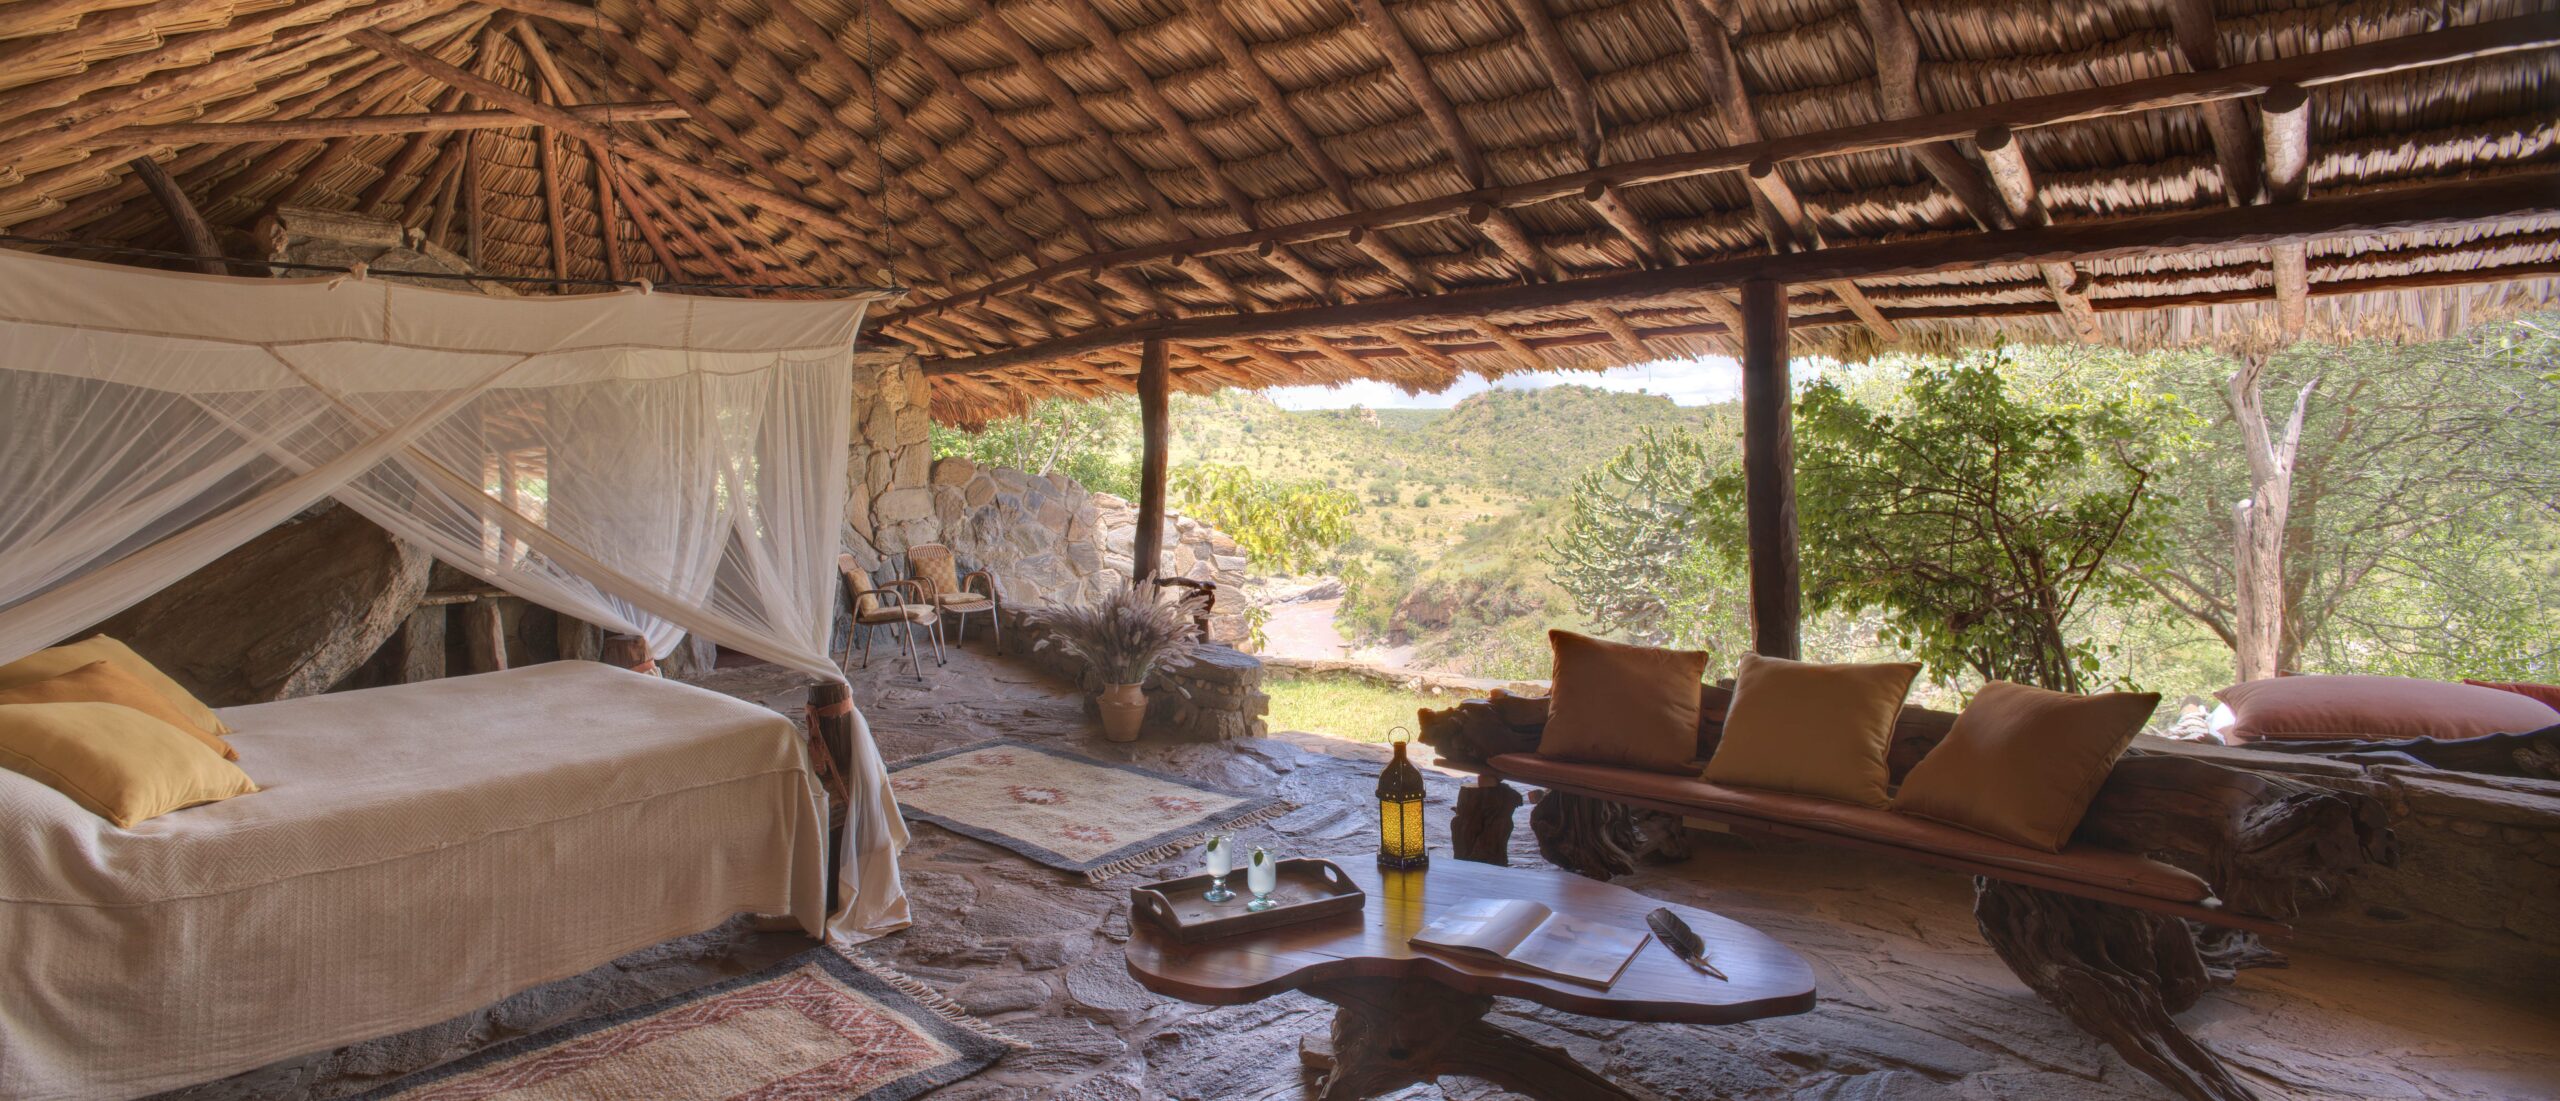 Traveling Solo to Africa and loving it! Suite